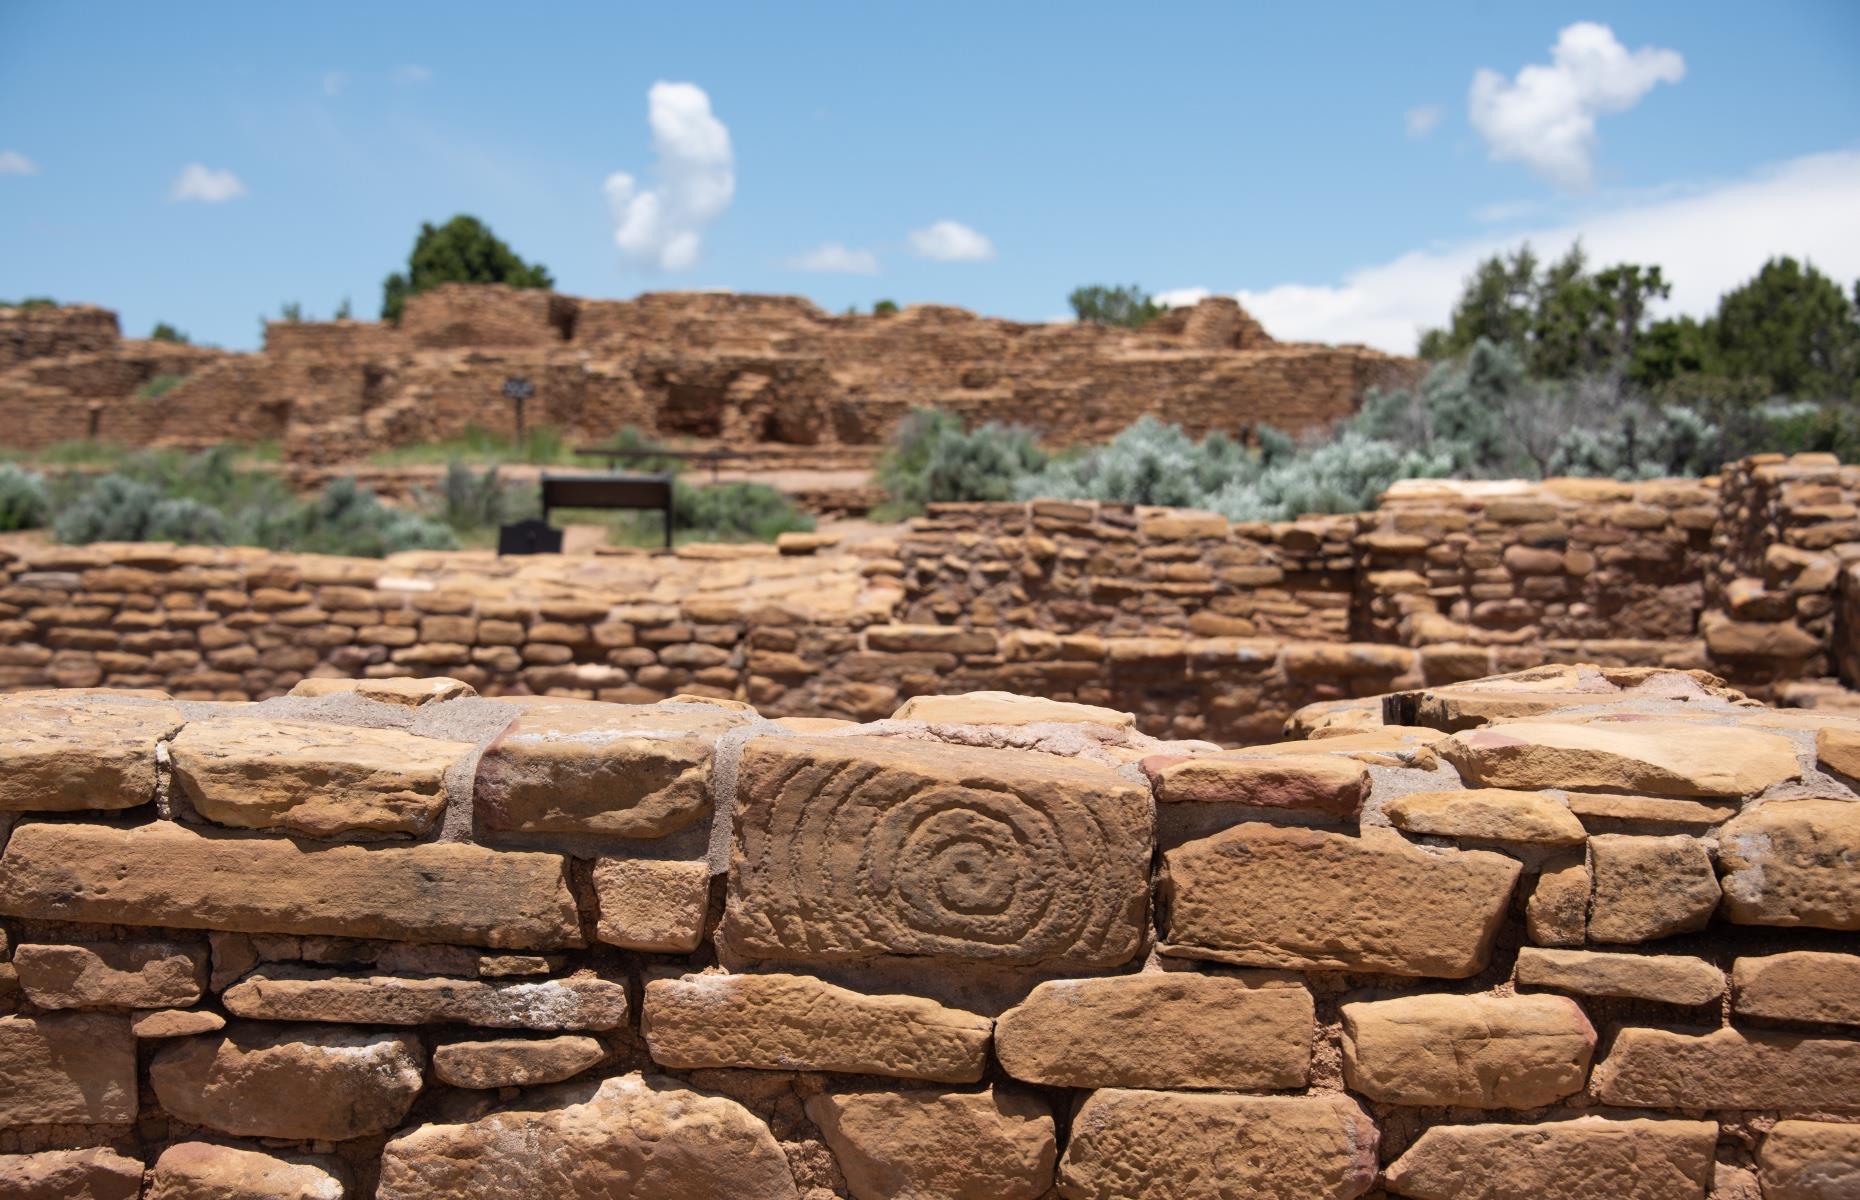 <p>This spiral on the south side of a dwelling called Pipe Shrine House is another good example of a petroglyph at Mesa Verde. Spirals are found in many Ancestral Puebloan sites and are interpreted by experts as depictions of migrations. In a Mesa Verde trail guide, Puebloan expert Jim Enote explains: "Migration has always been part of the human experience as we adapt to changing situations. I also think a spiral is a metaphor for finding our center and truth."</p>